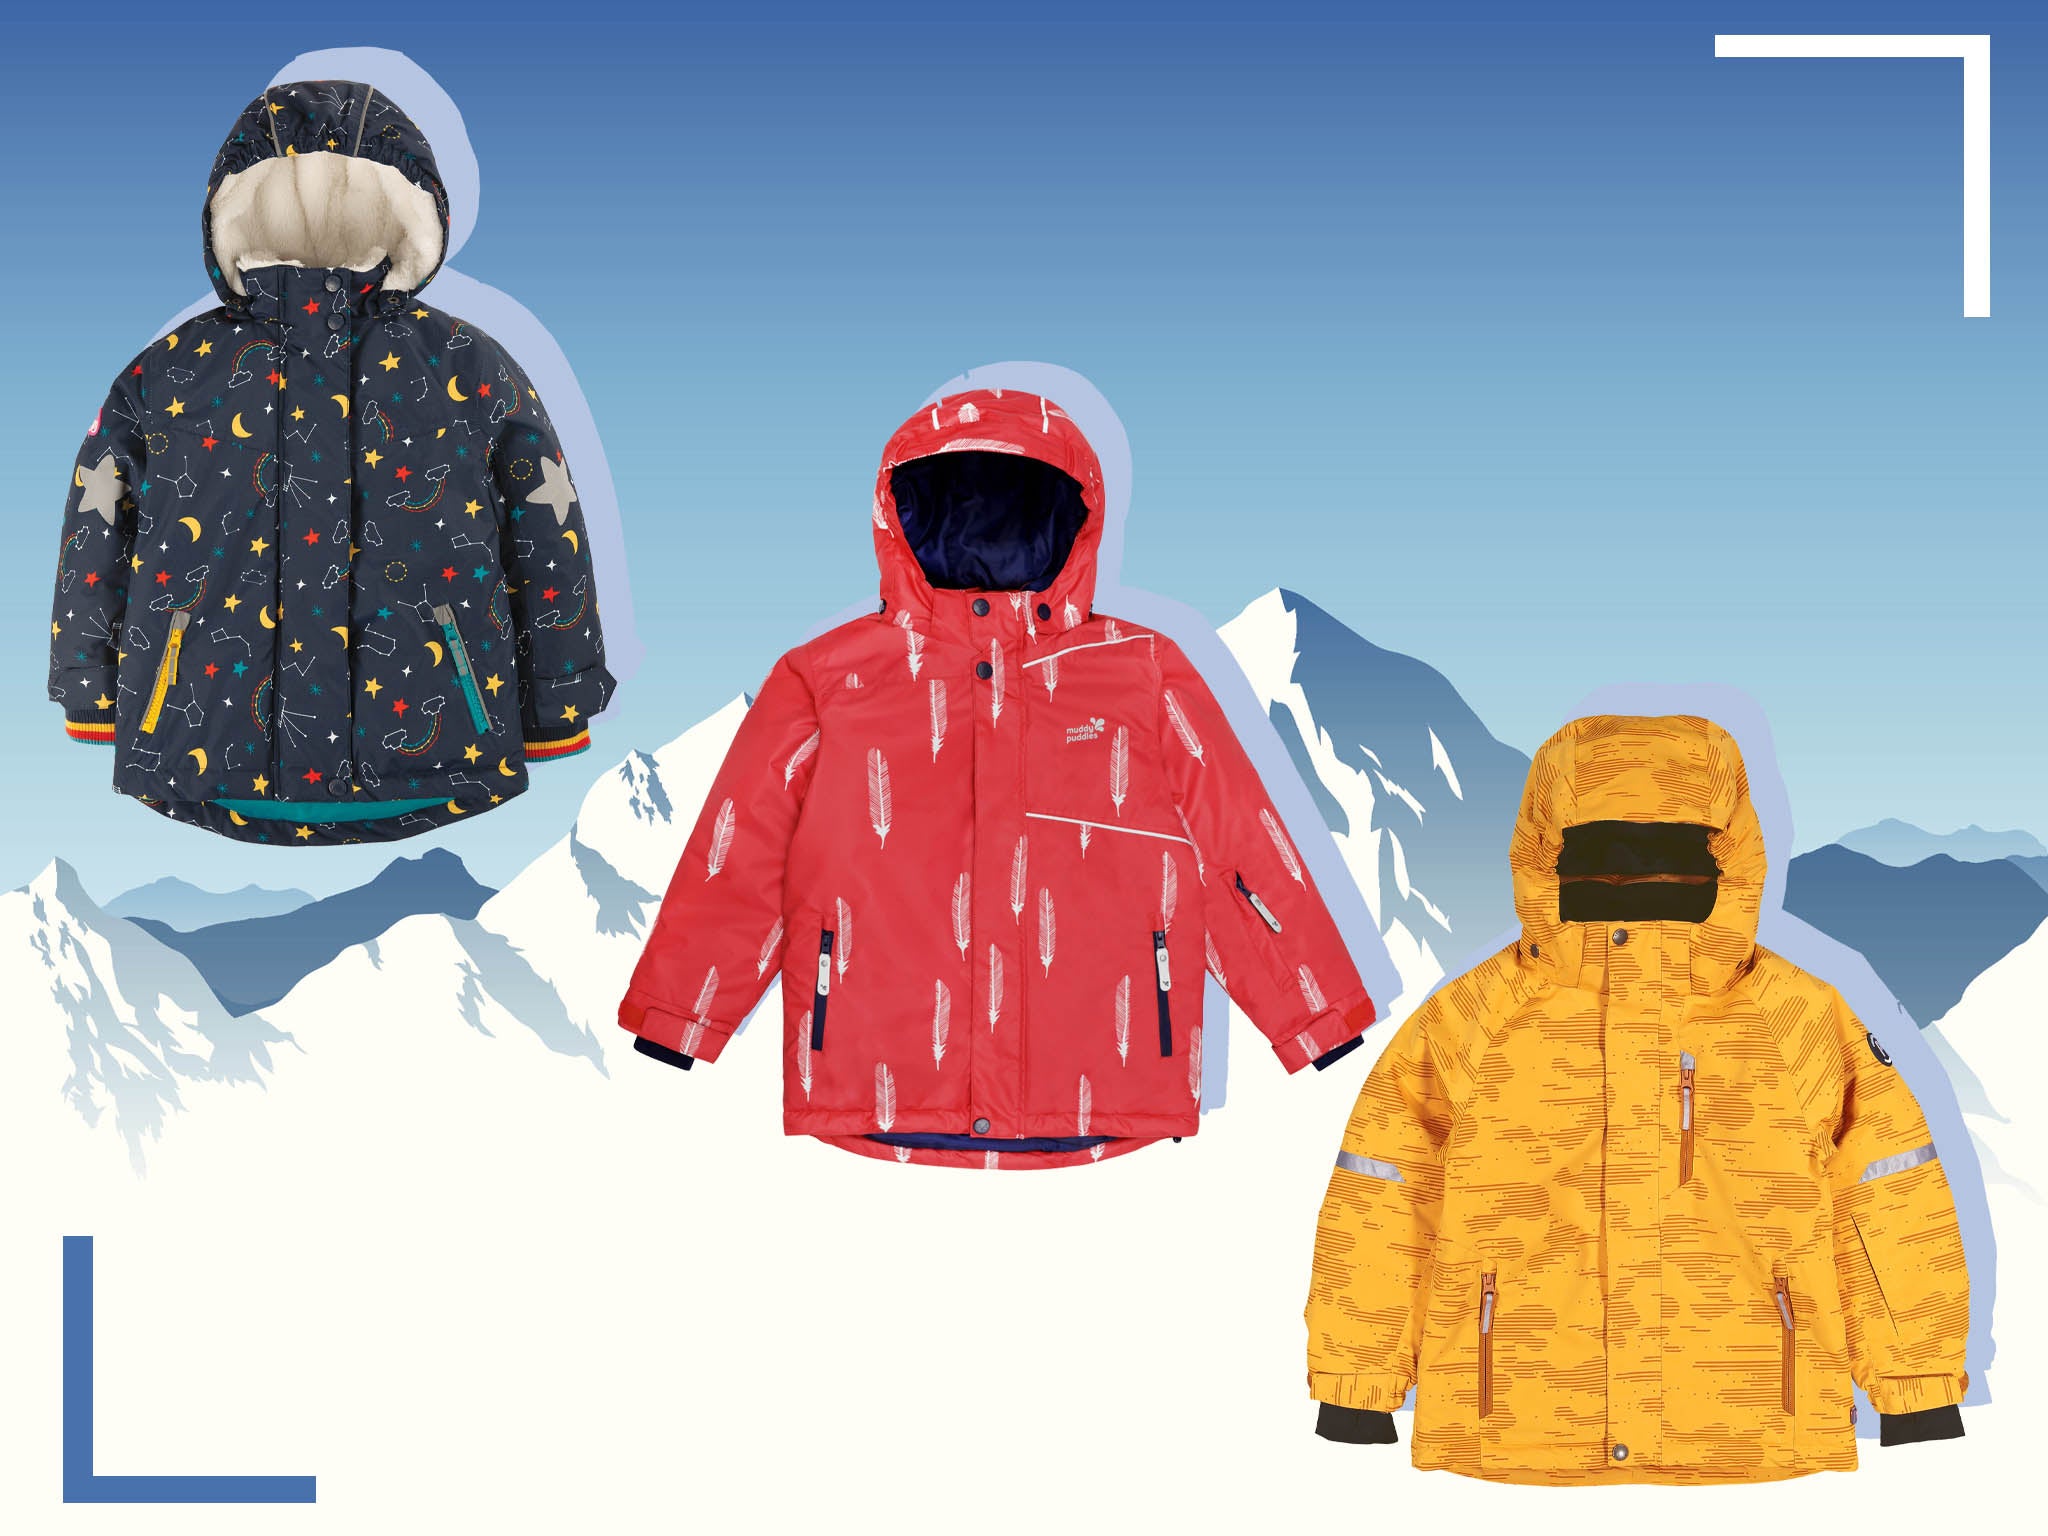 10 best kids’ ski jackets for keeping warm while on the slopes